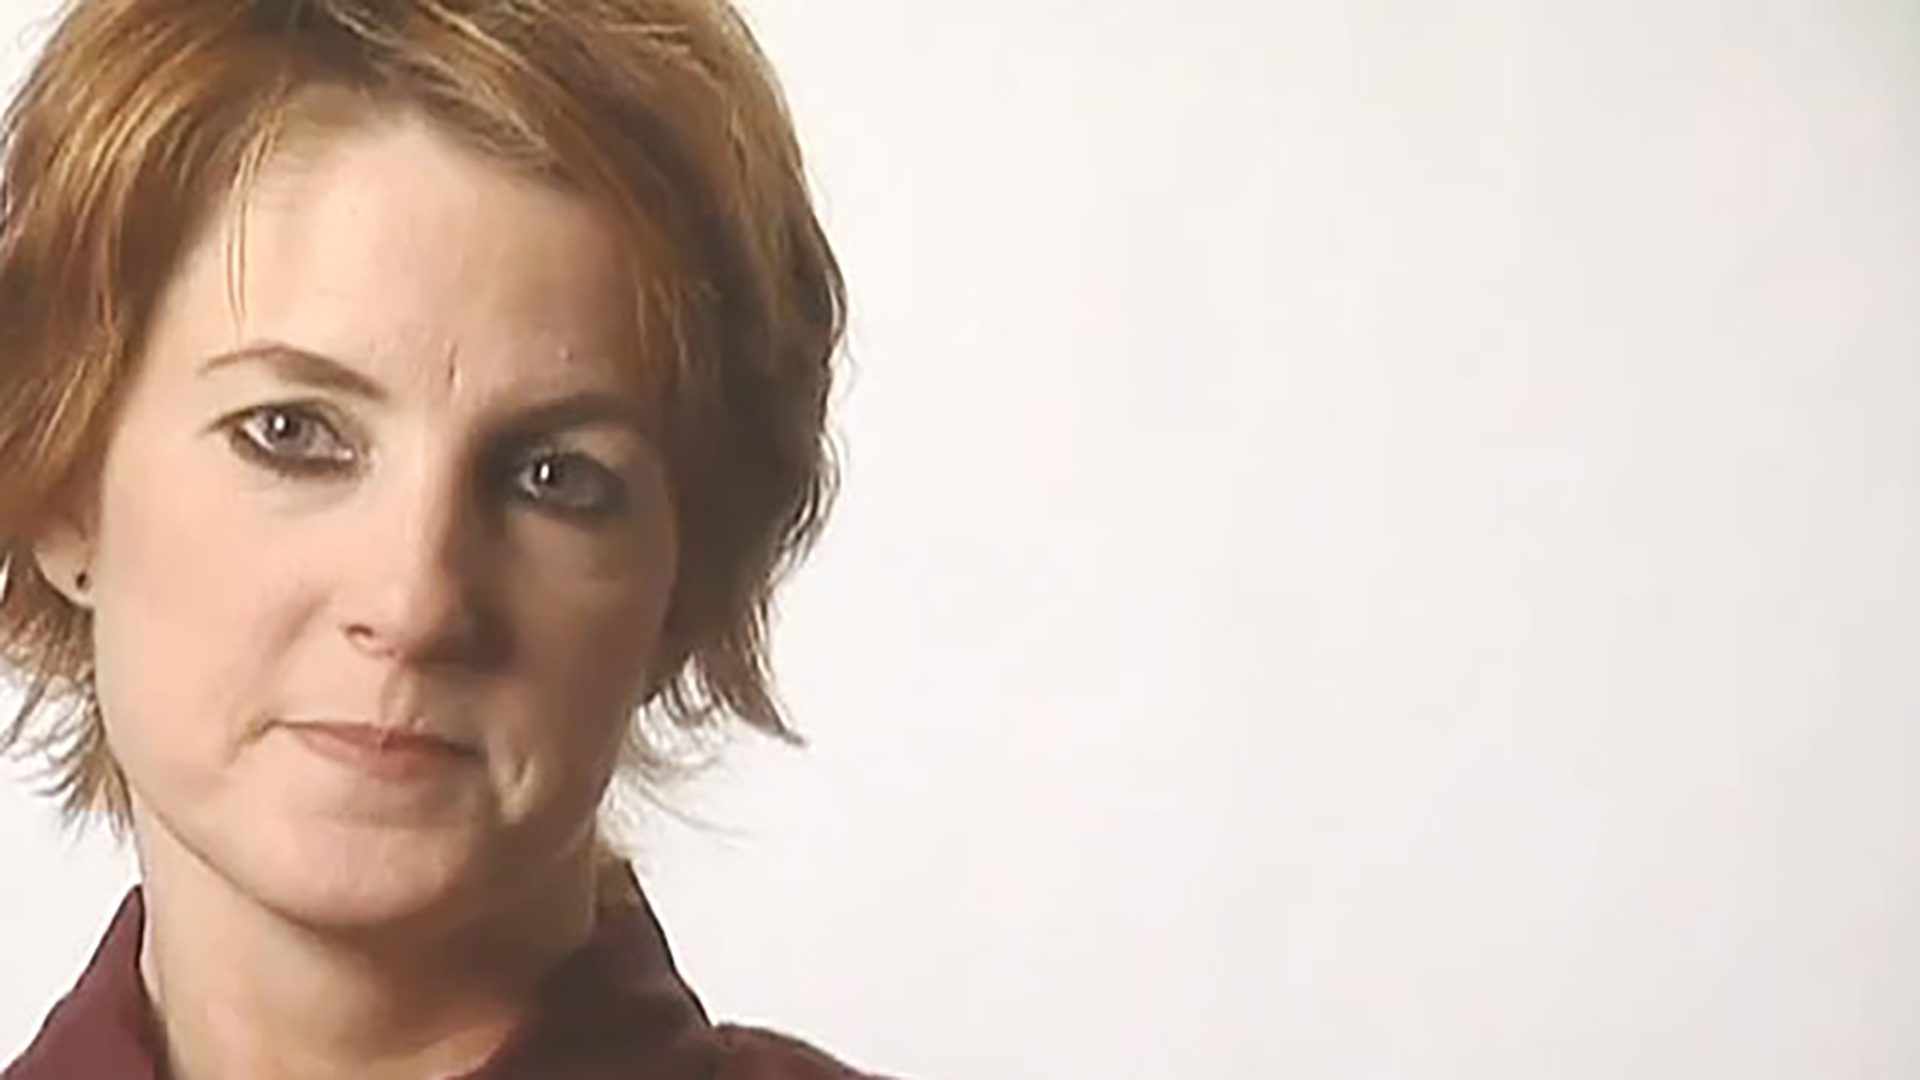 A portrait of a woman with short hair wearing eye makeup and a maroon collared shirt